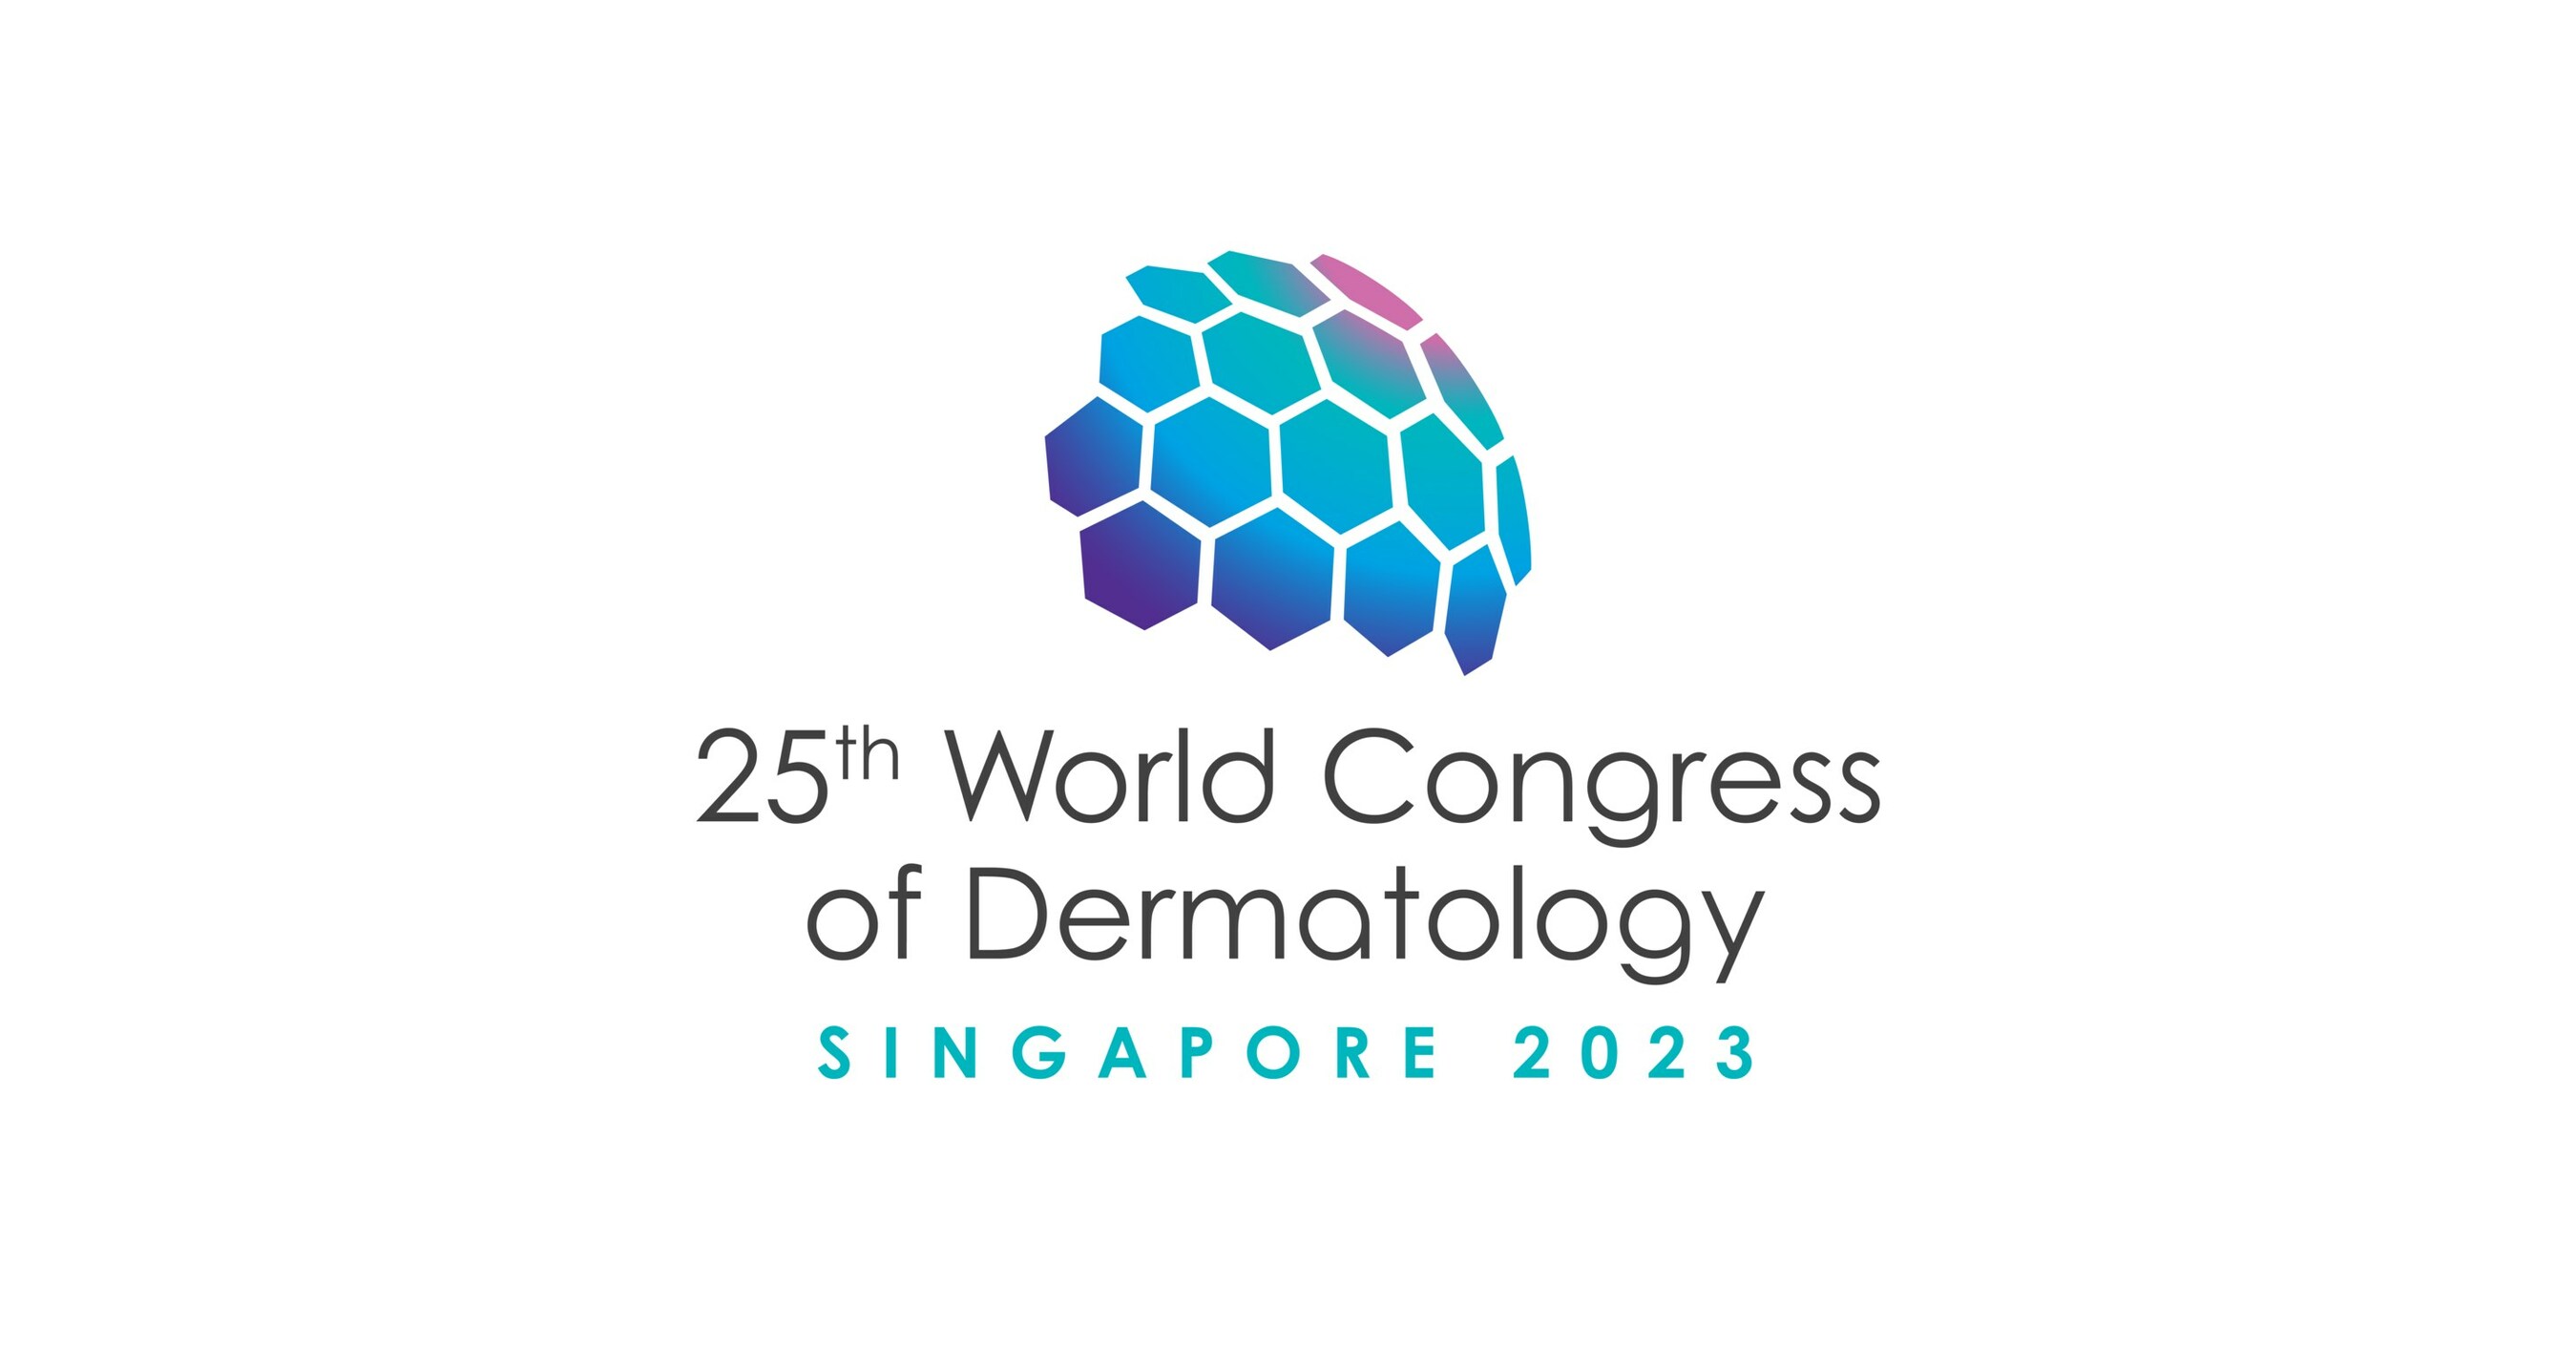 Singapore Hosts the 25th World Congress of Dermatology The First in